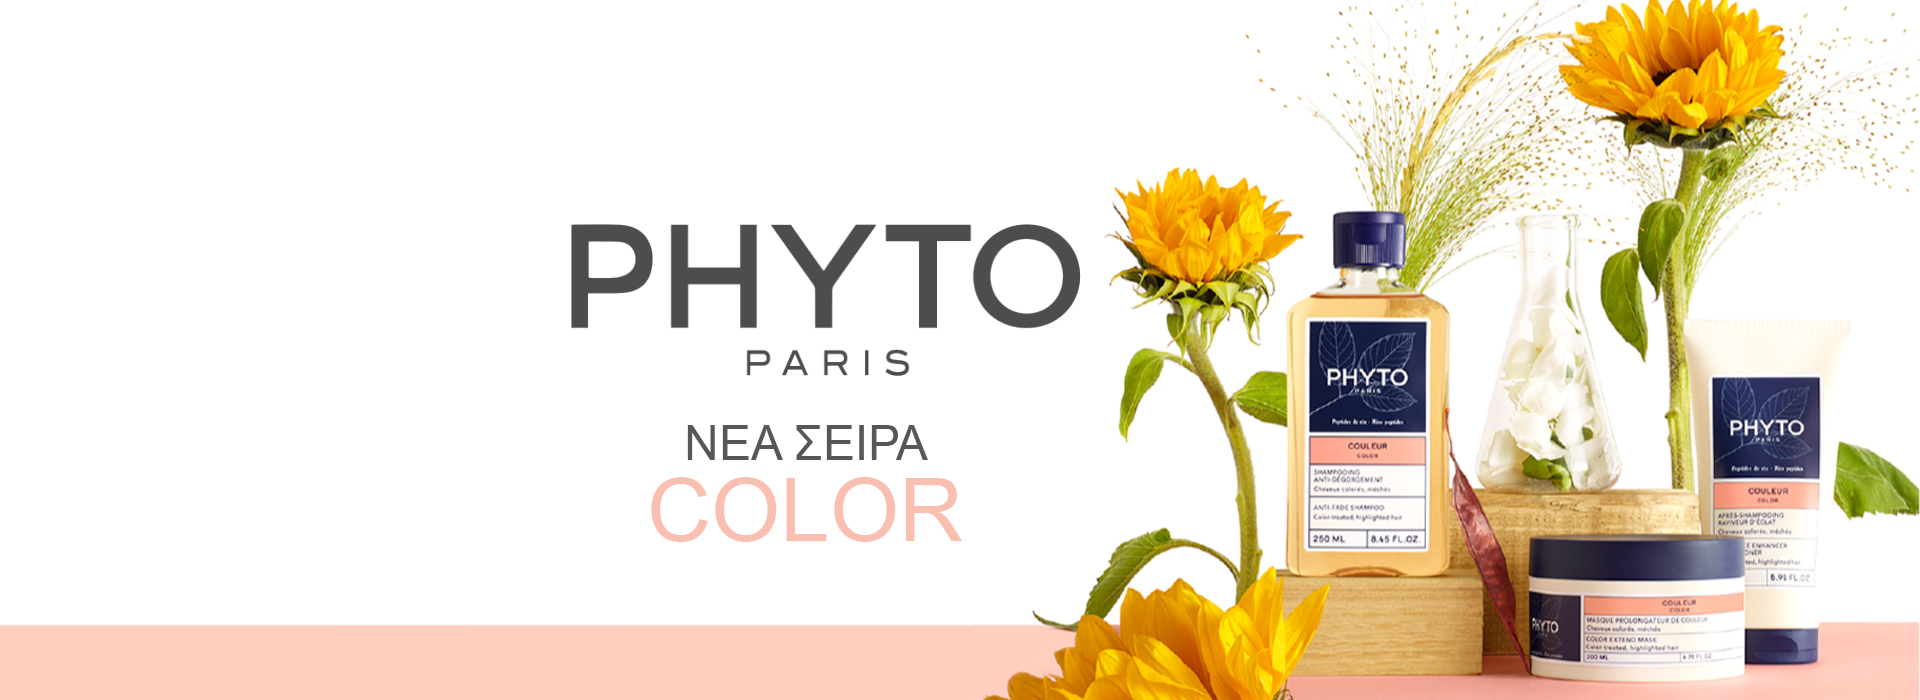 Phyto Color